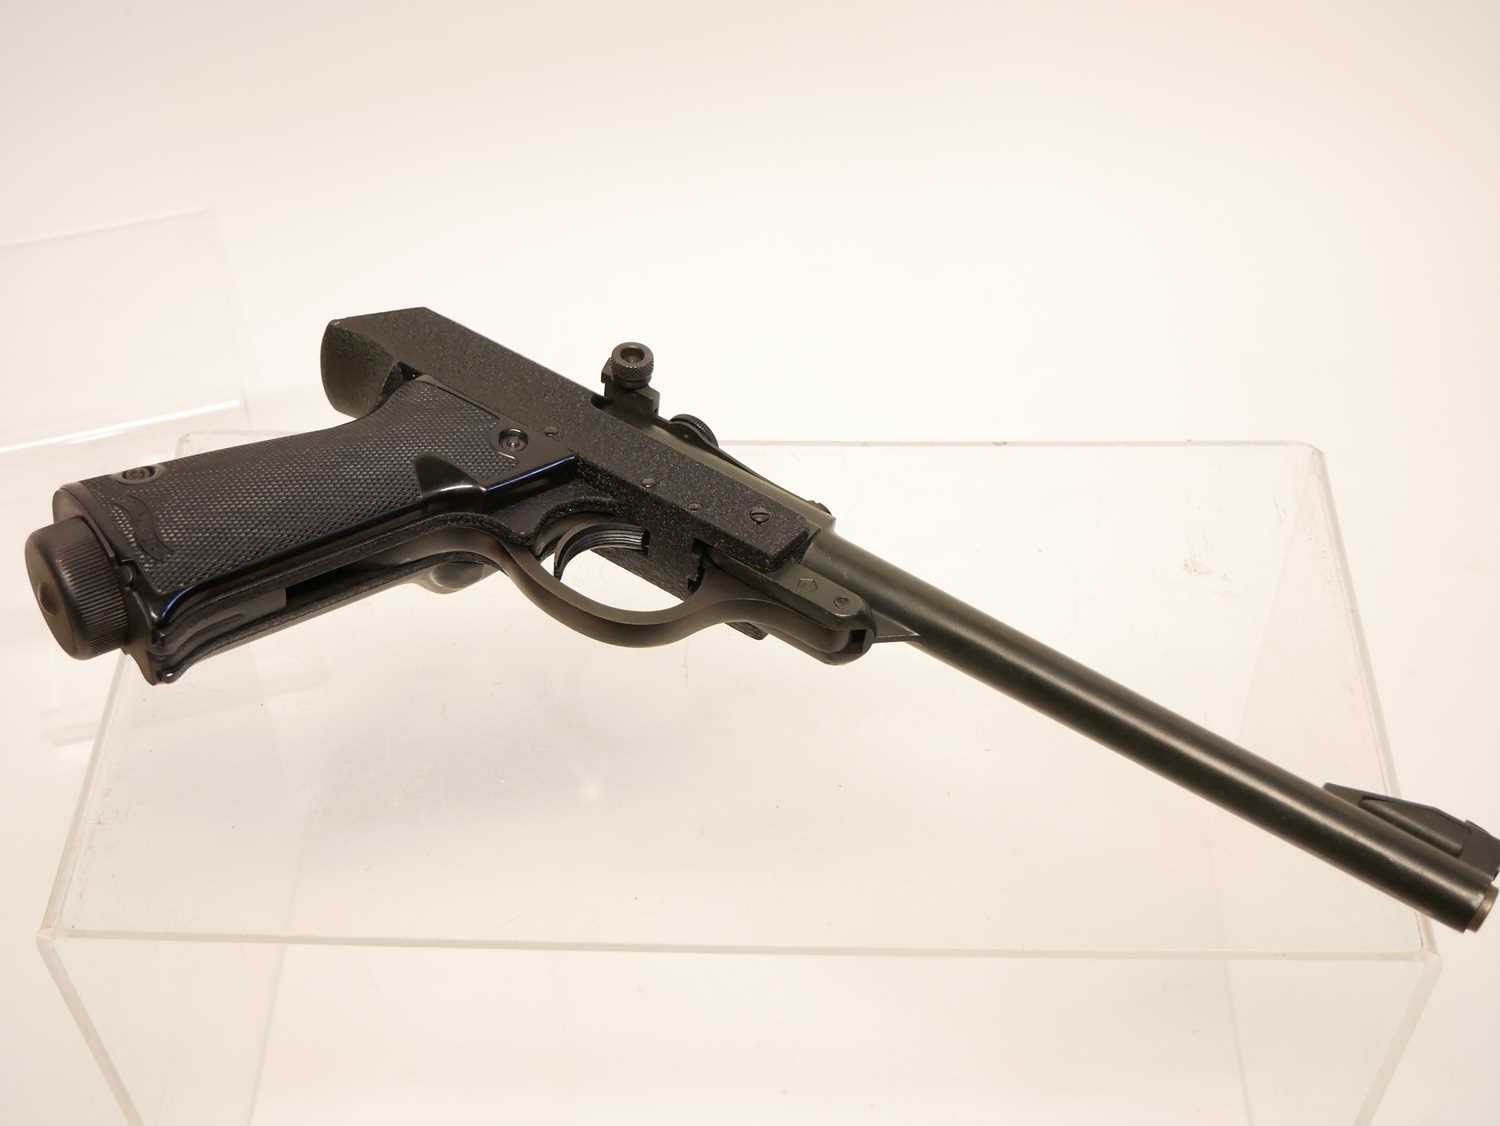 Boxed Walther .177 Model LP.53 air pistol (Luftpistole), 9.5inch barrel, serial number 118326, - Image 3 of 12